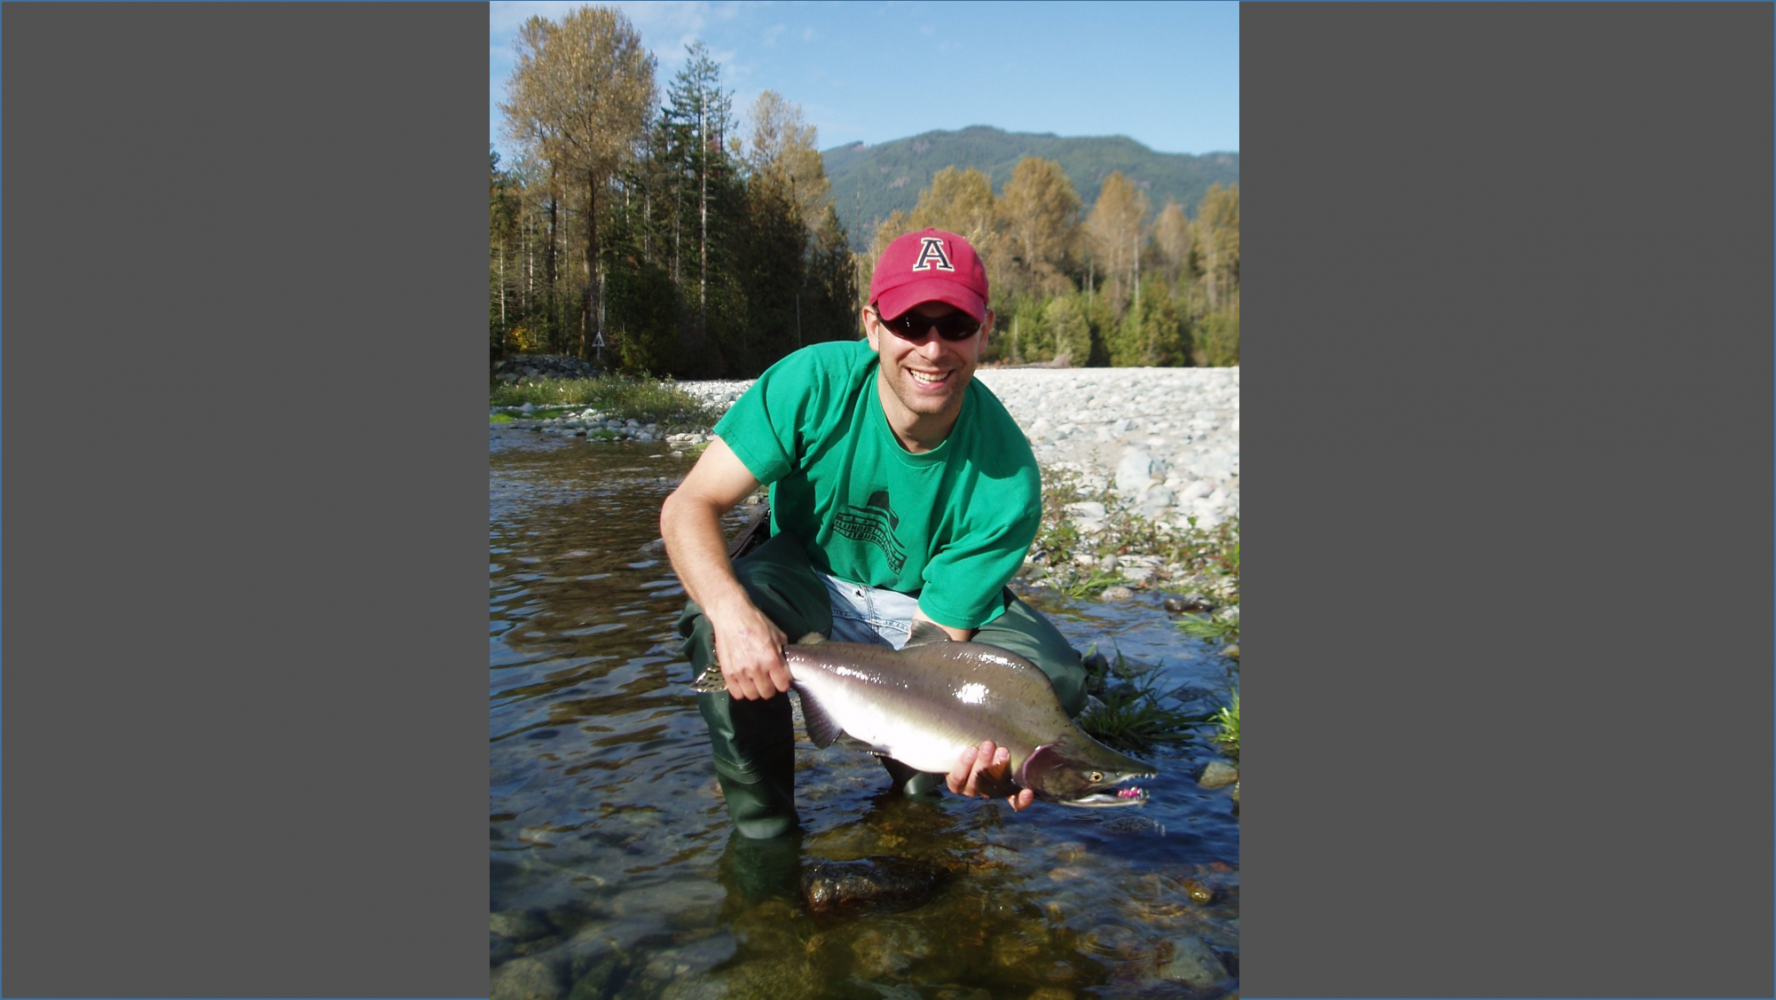 Simple fish hook change creates career highlight, real conservation impact